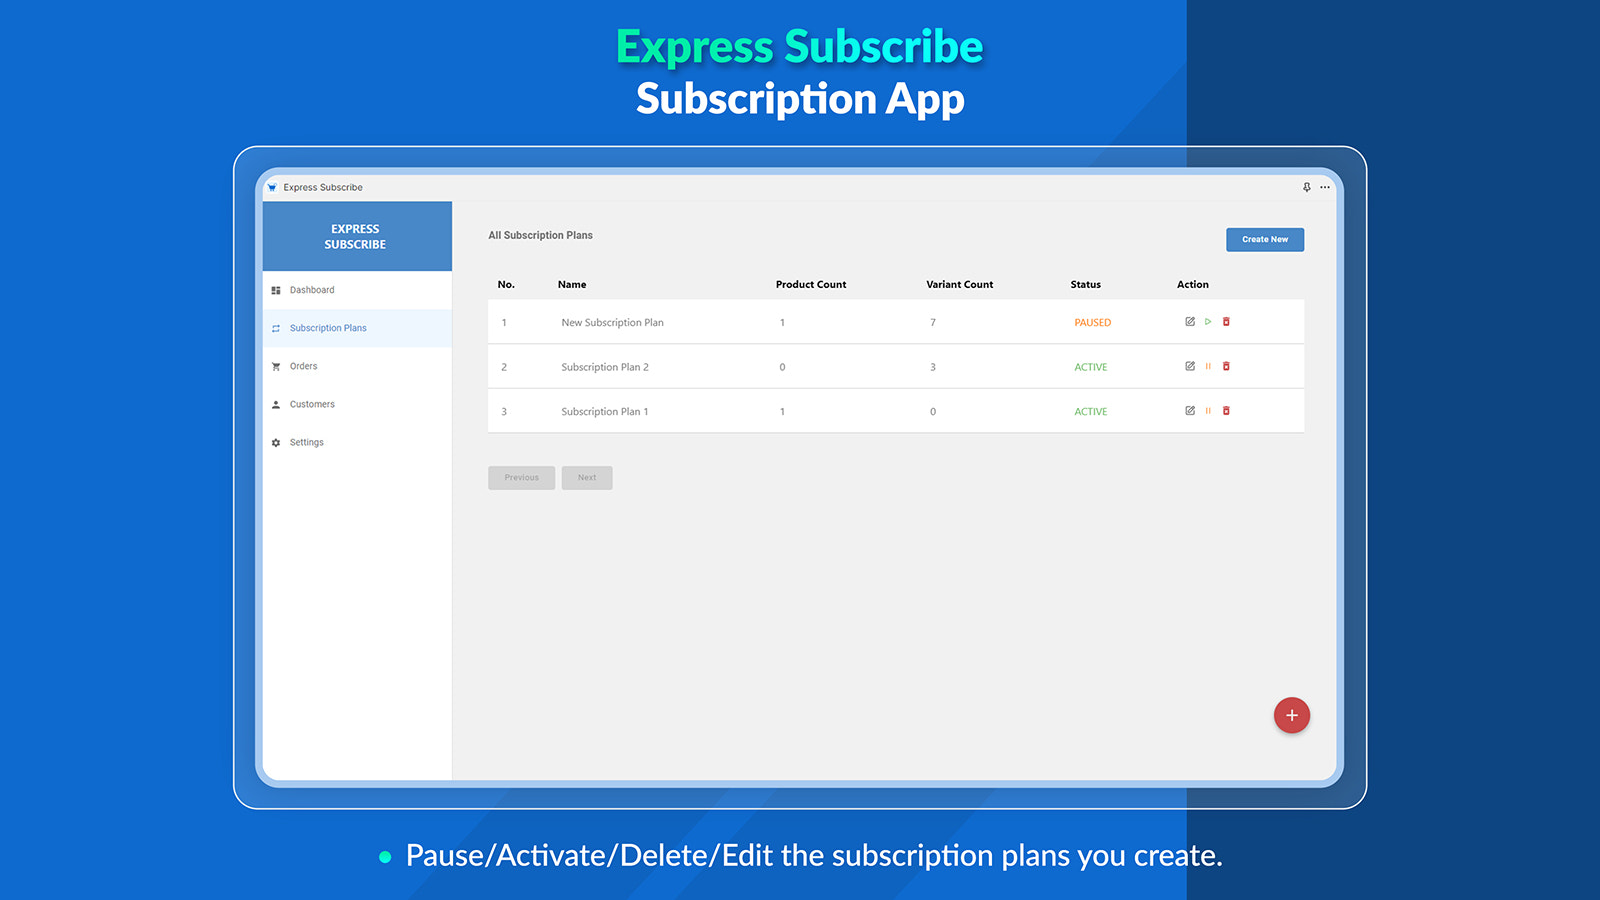 Manage (pause/resume) a subscription plan from the app